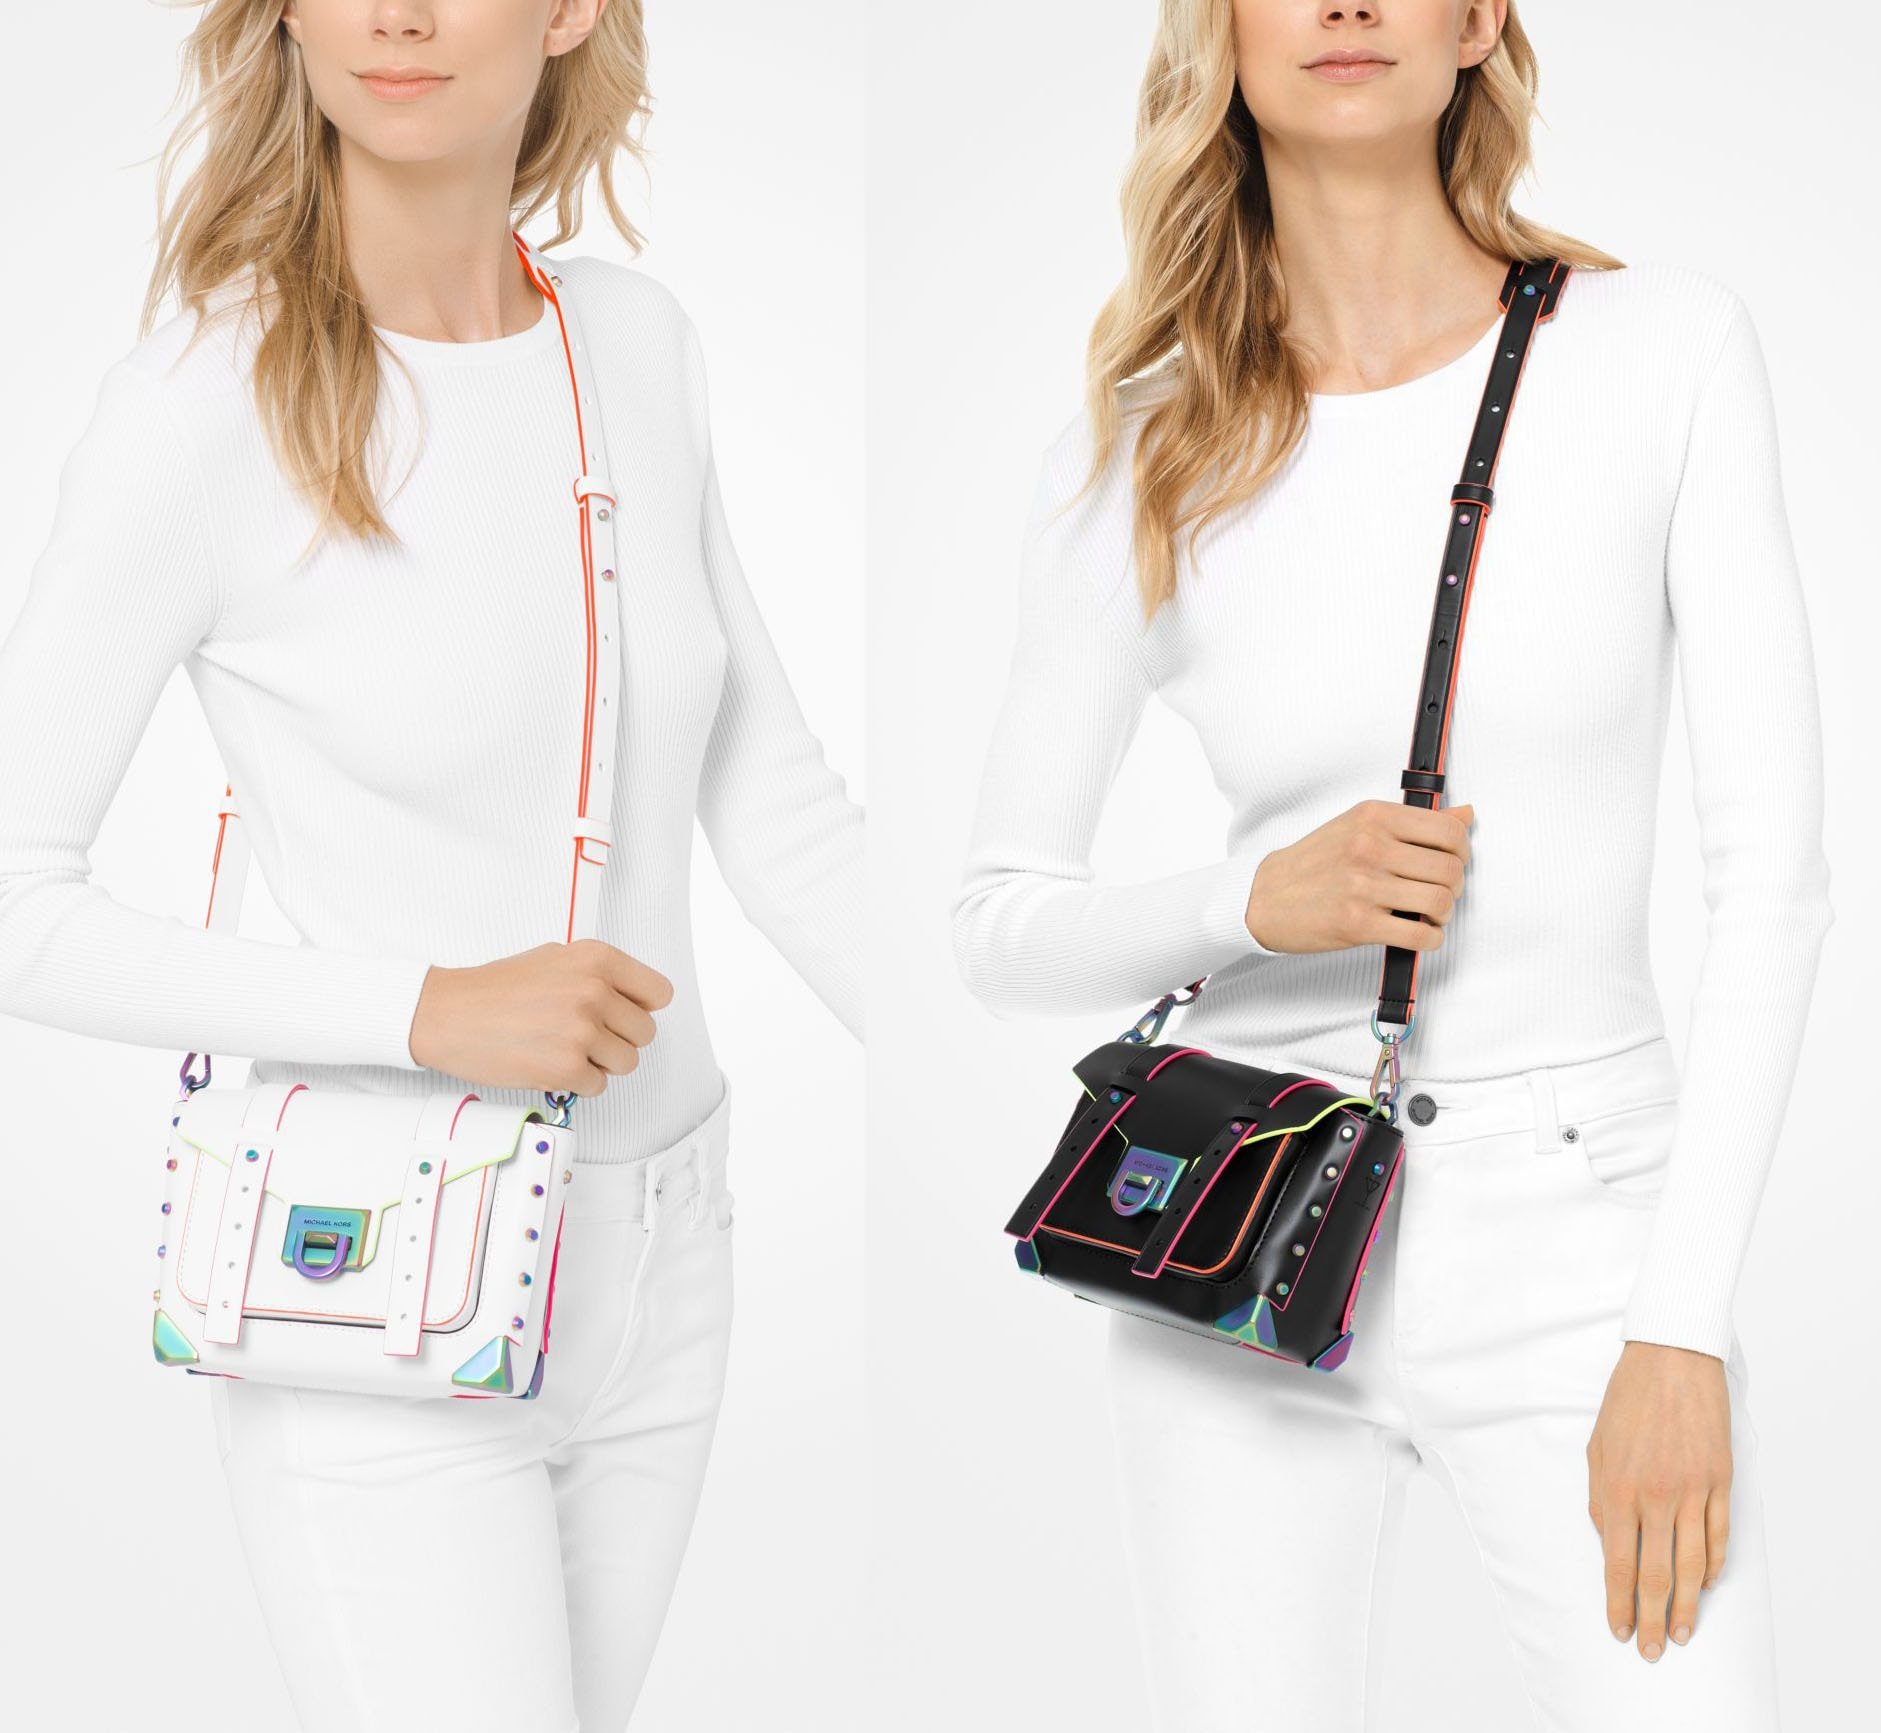 Available in three colors, the Manhattan crossbody bag features chic neon contrasting trims and iridescent metal hardware